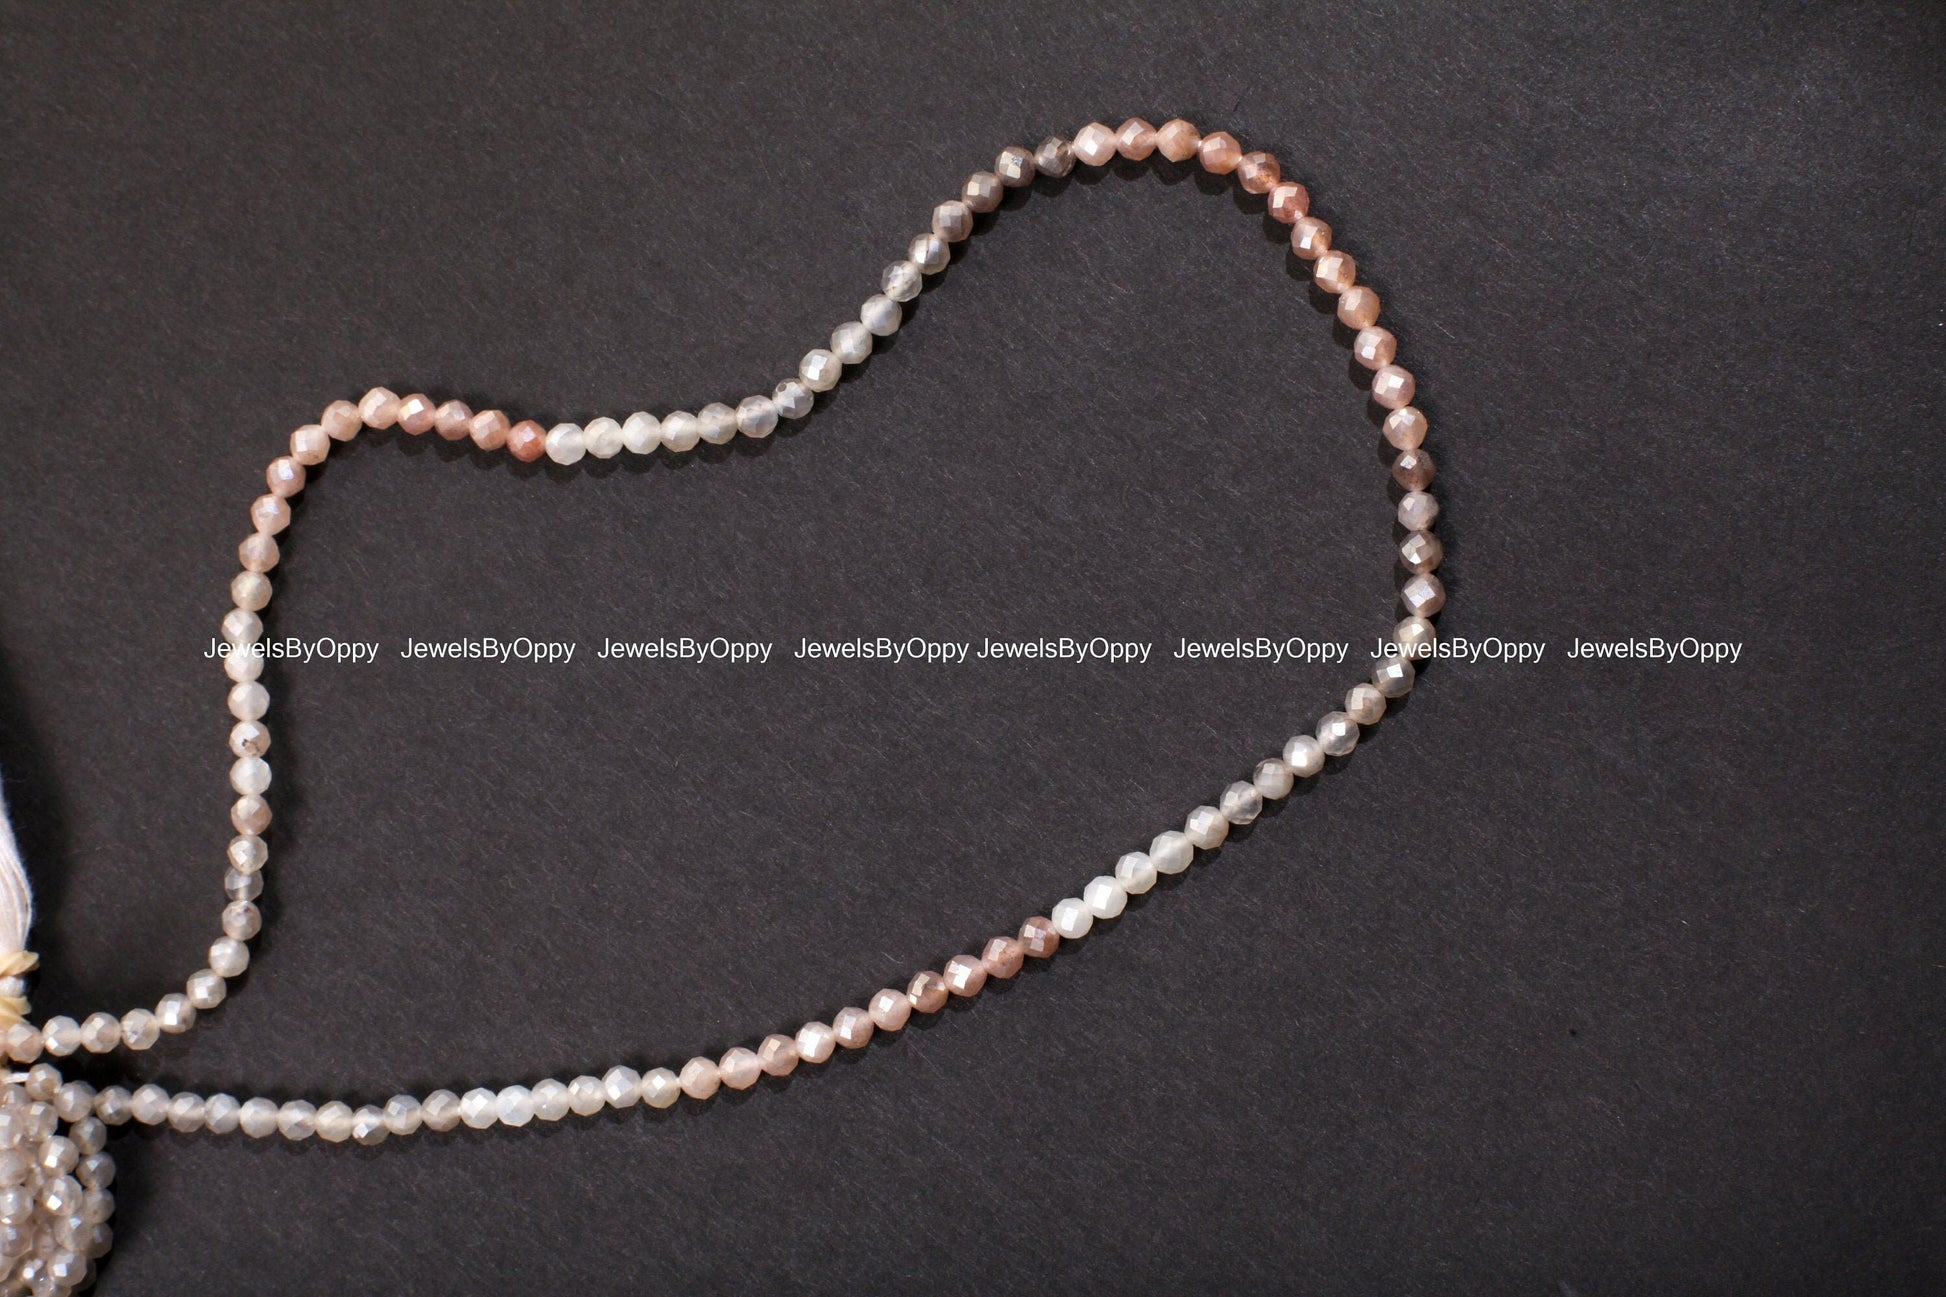 Natural Multi-Toned peach Moonstone Mystic Faceted 3mm Round Beads, DIY Jewelry Making Gemstone Beige Bracelet, Necklace 12.25”Strand,